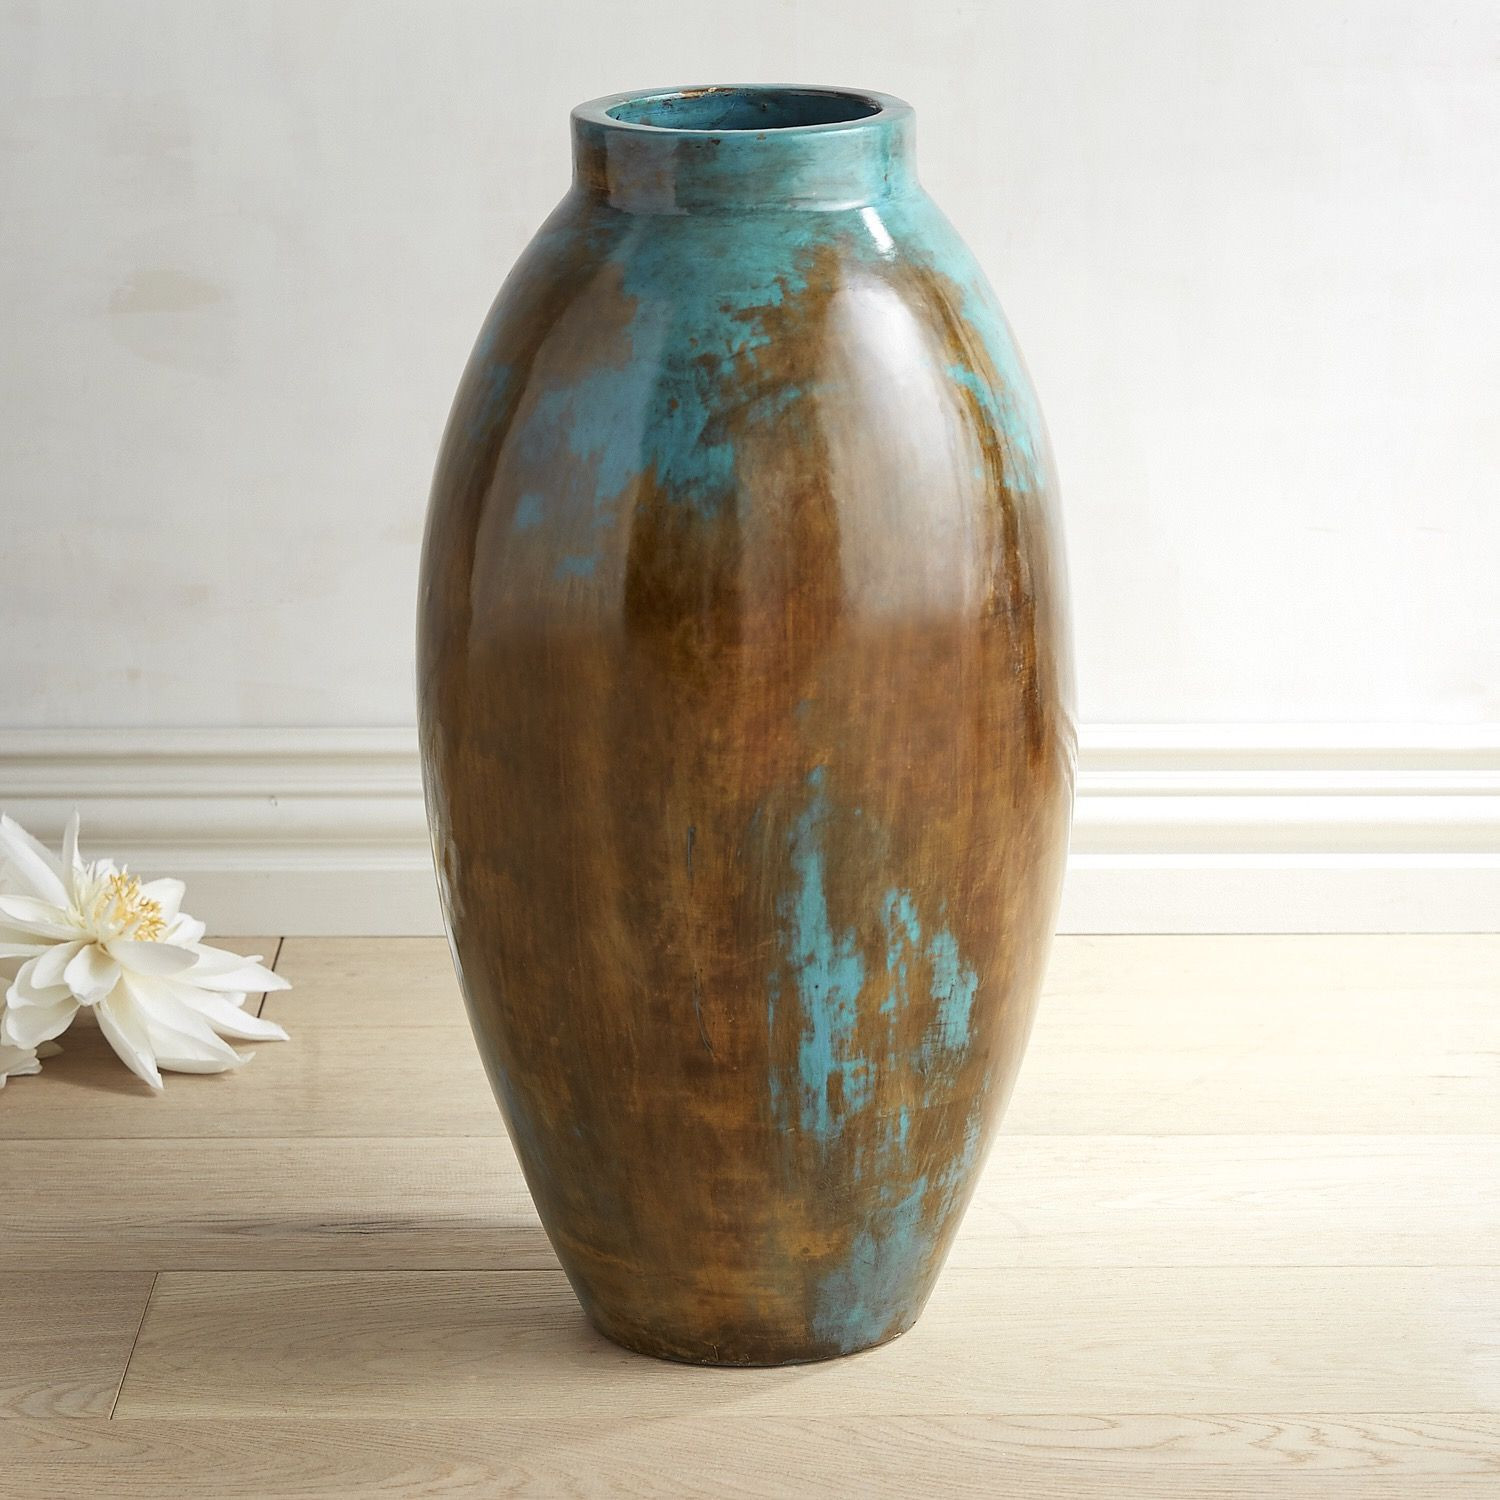 25 Trendy Small Teal Vase 2024 free download small teal vase of blue brown oval floor vase products pinterest vase vases inside blue brown oval floor vase